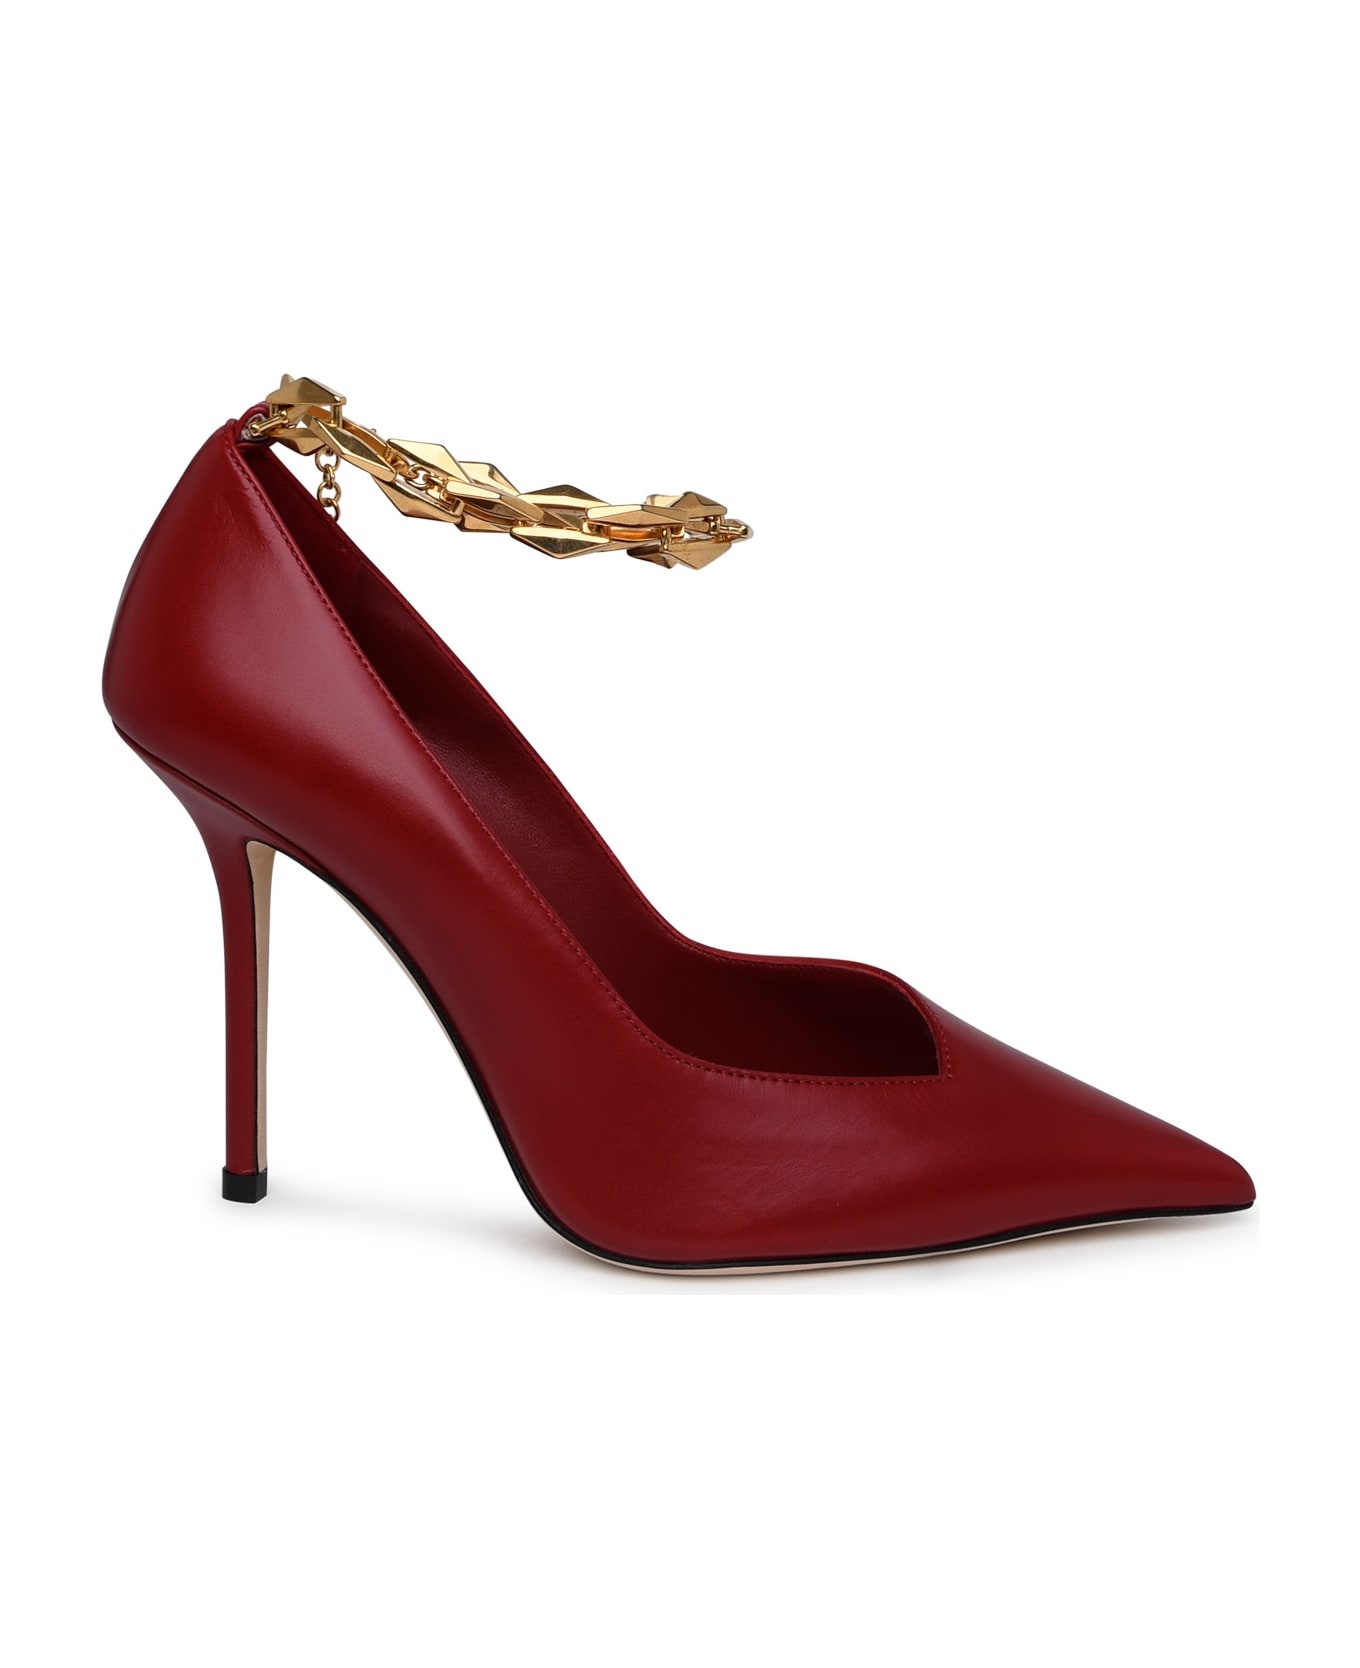 Diamond Pumps In Red Leather - 1